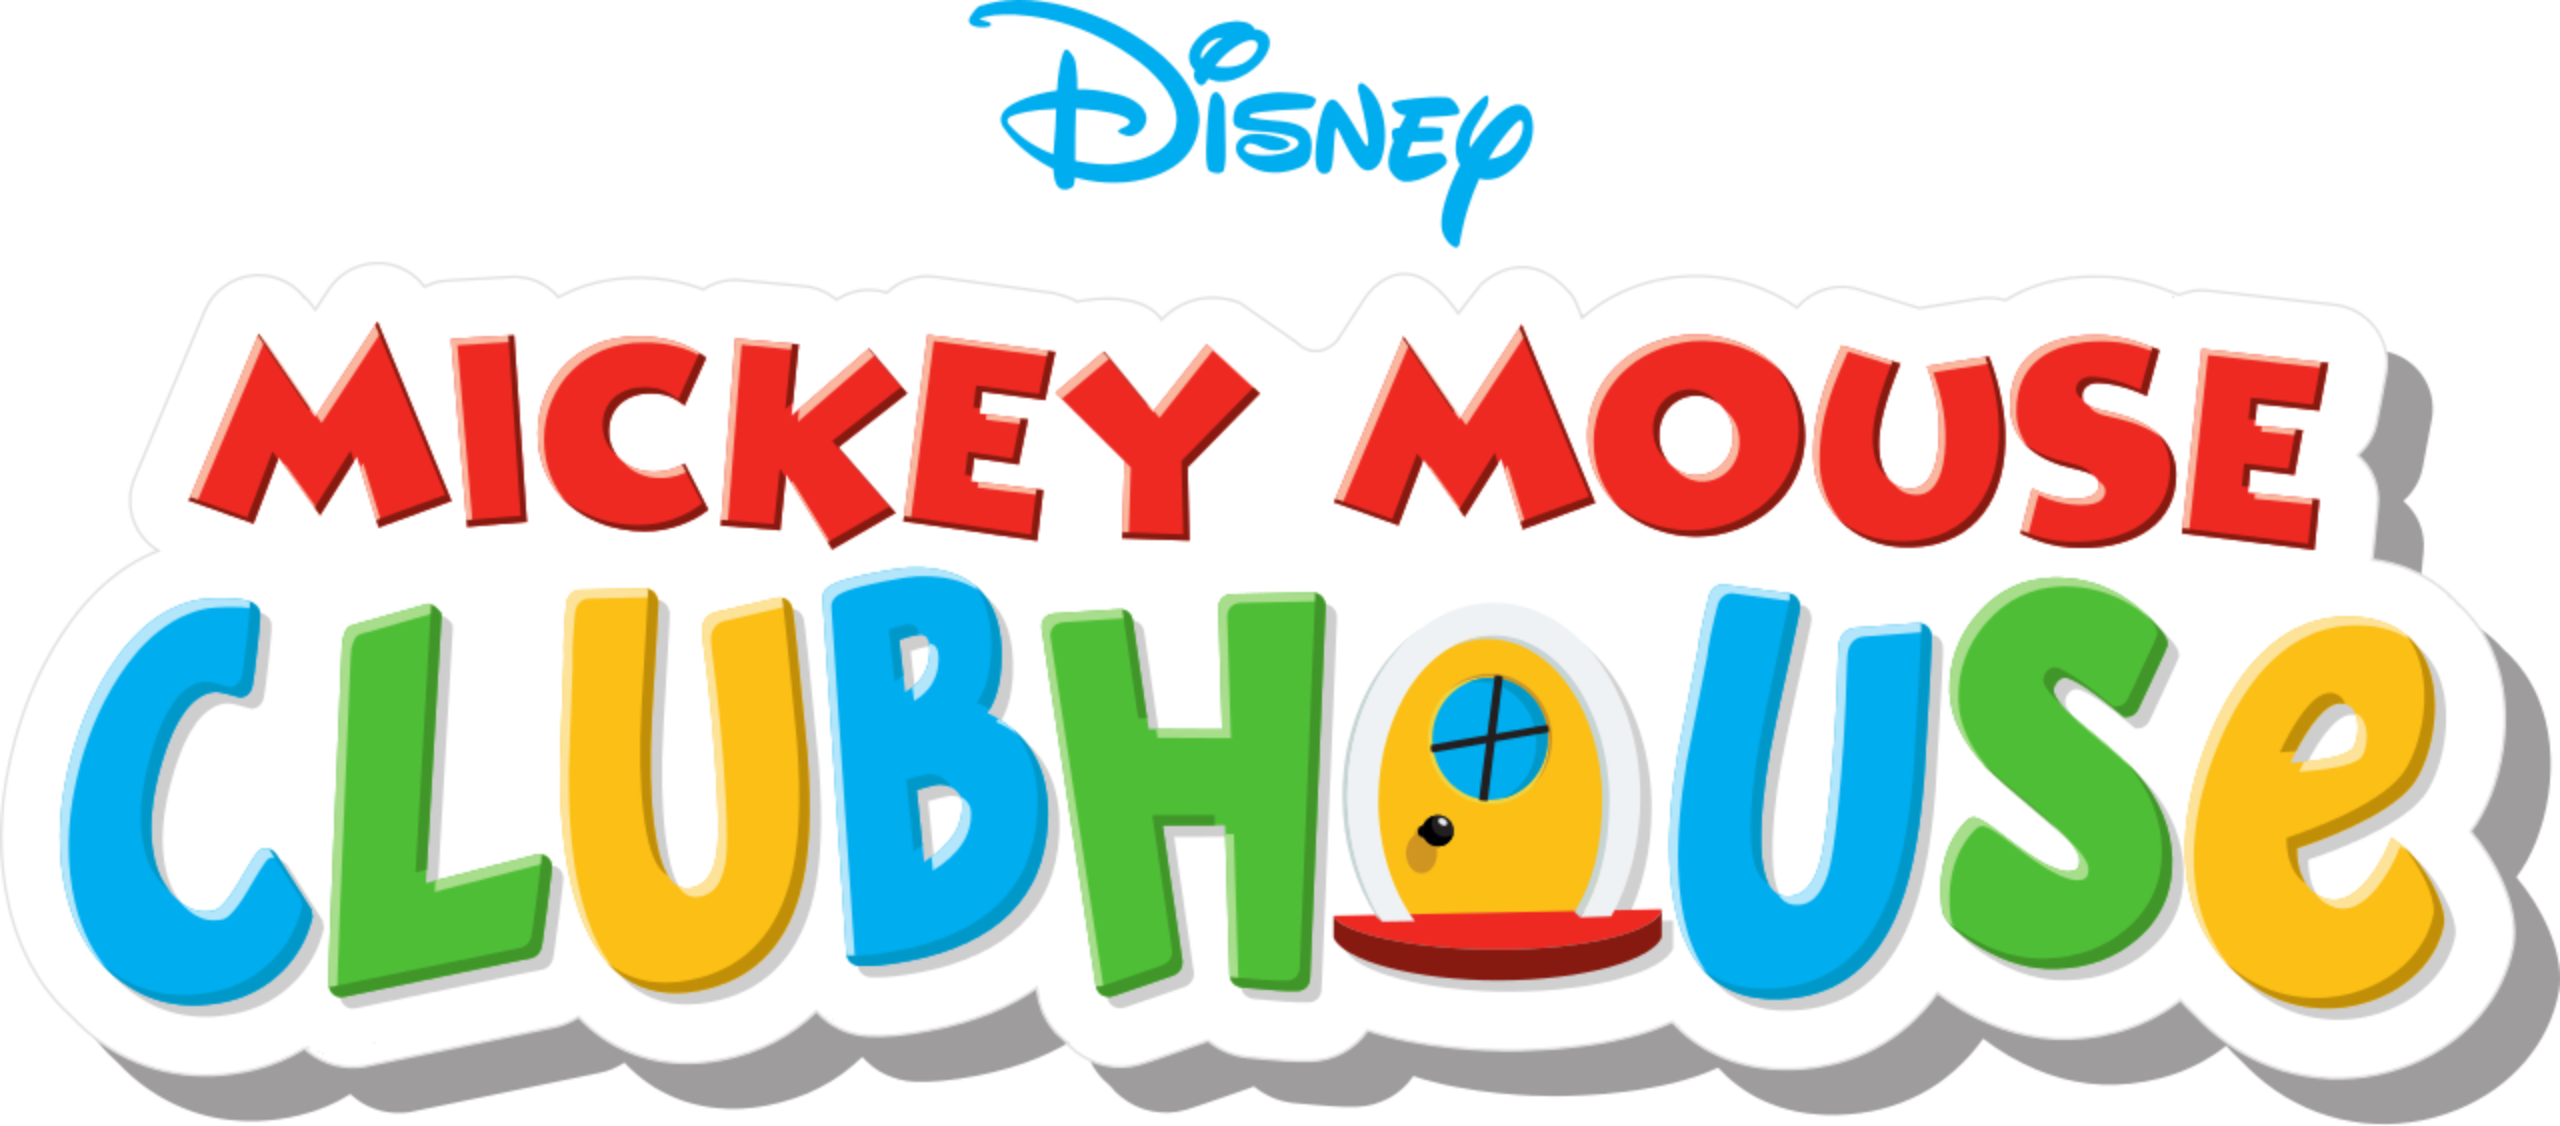 Mickey Mouse Clubhouse Volume 1 and 2 